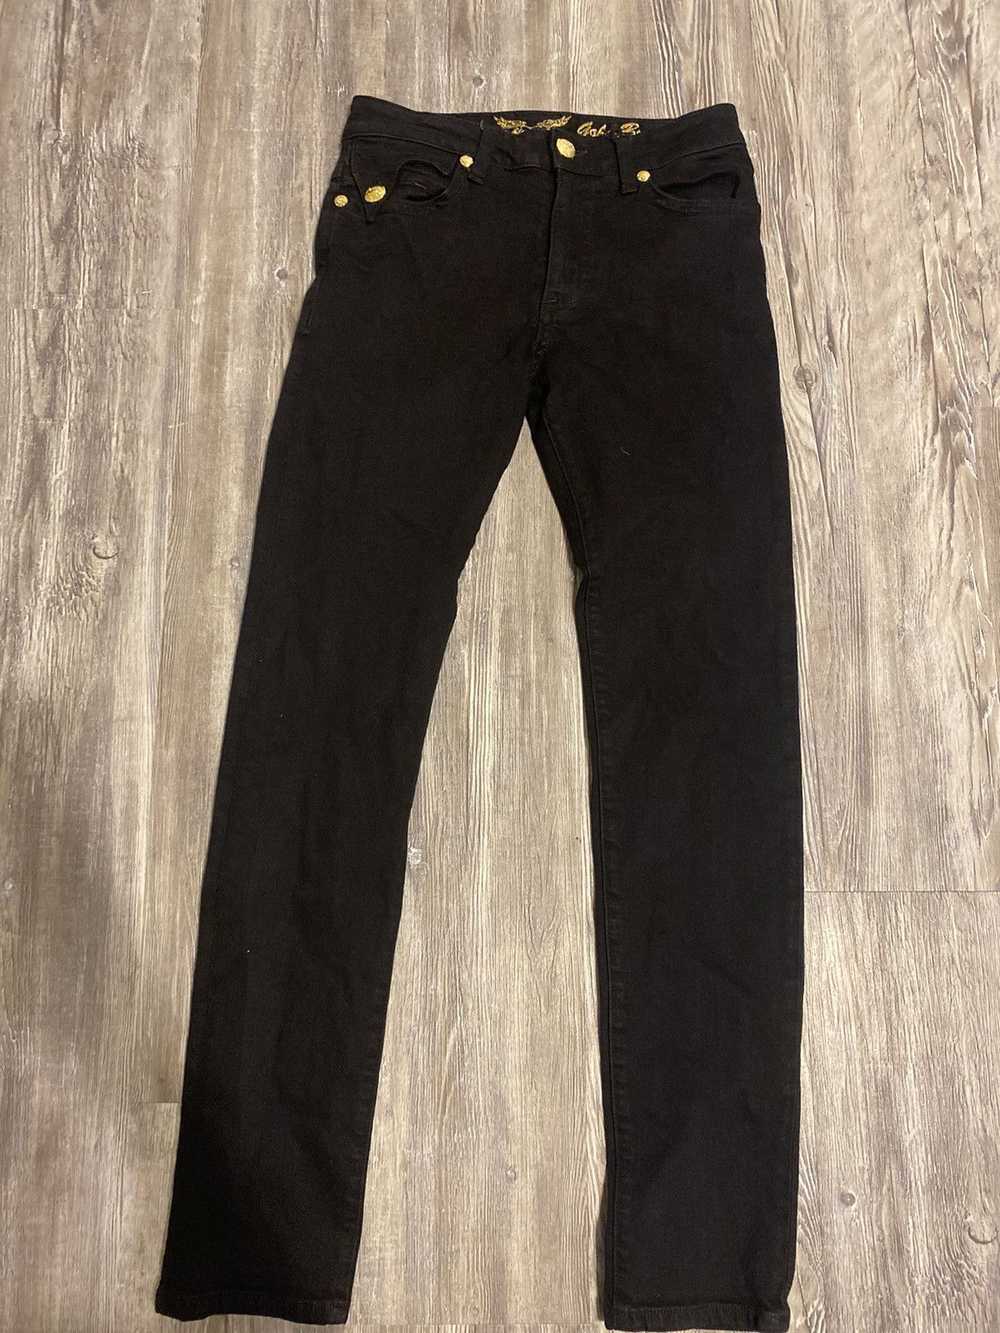 Robins Jeans Robins jeans black/gold - image 1